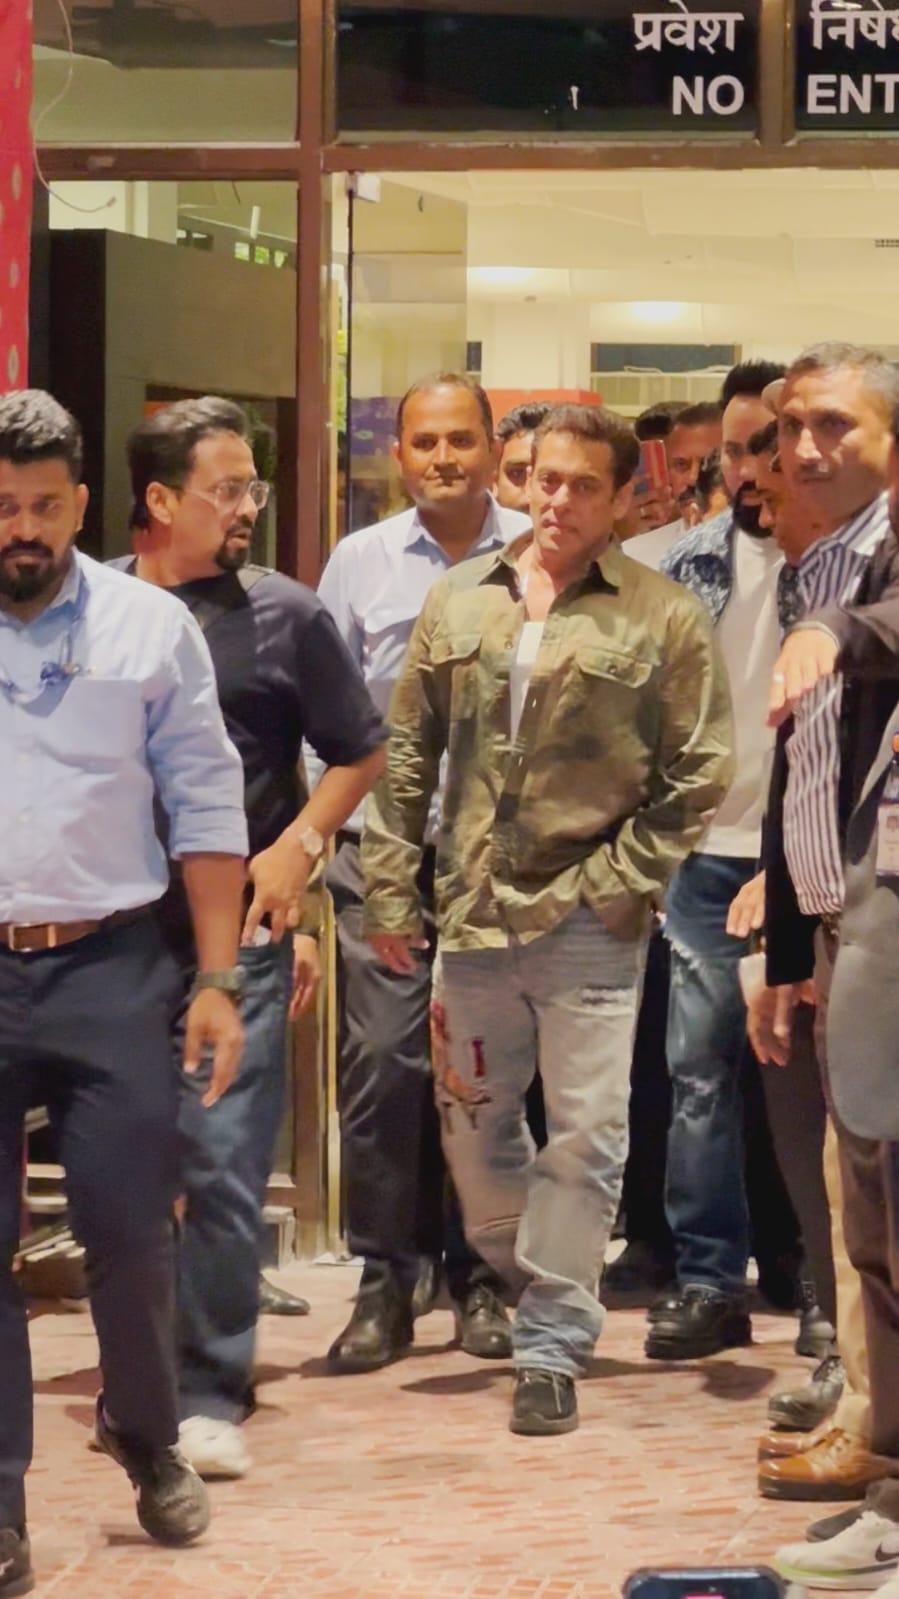 The 'Bharat' actor was seen with heavy security wearing a white t-shirt with printed denim and a camouflage shirt. Even at 58, Salman’s swag remains unmatched.